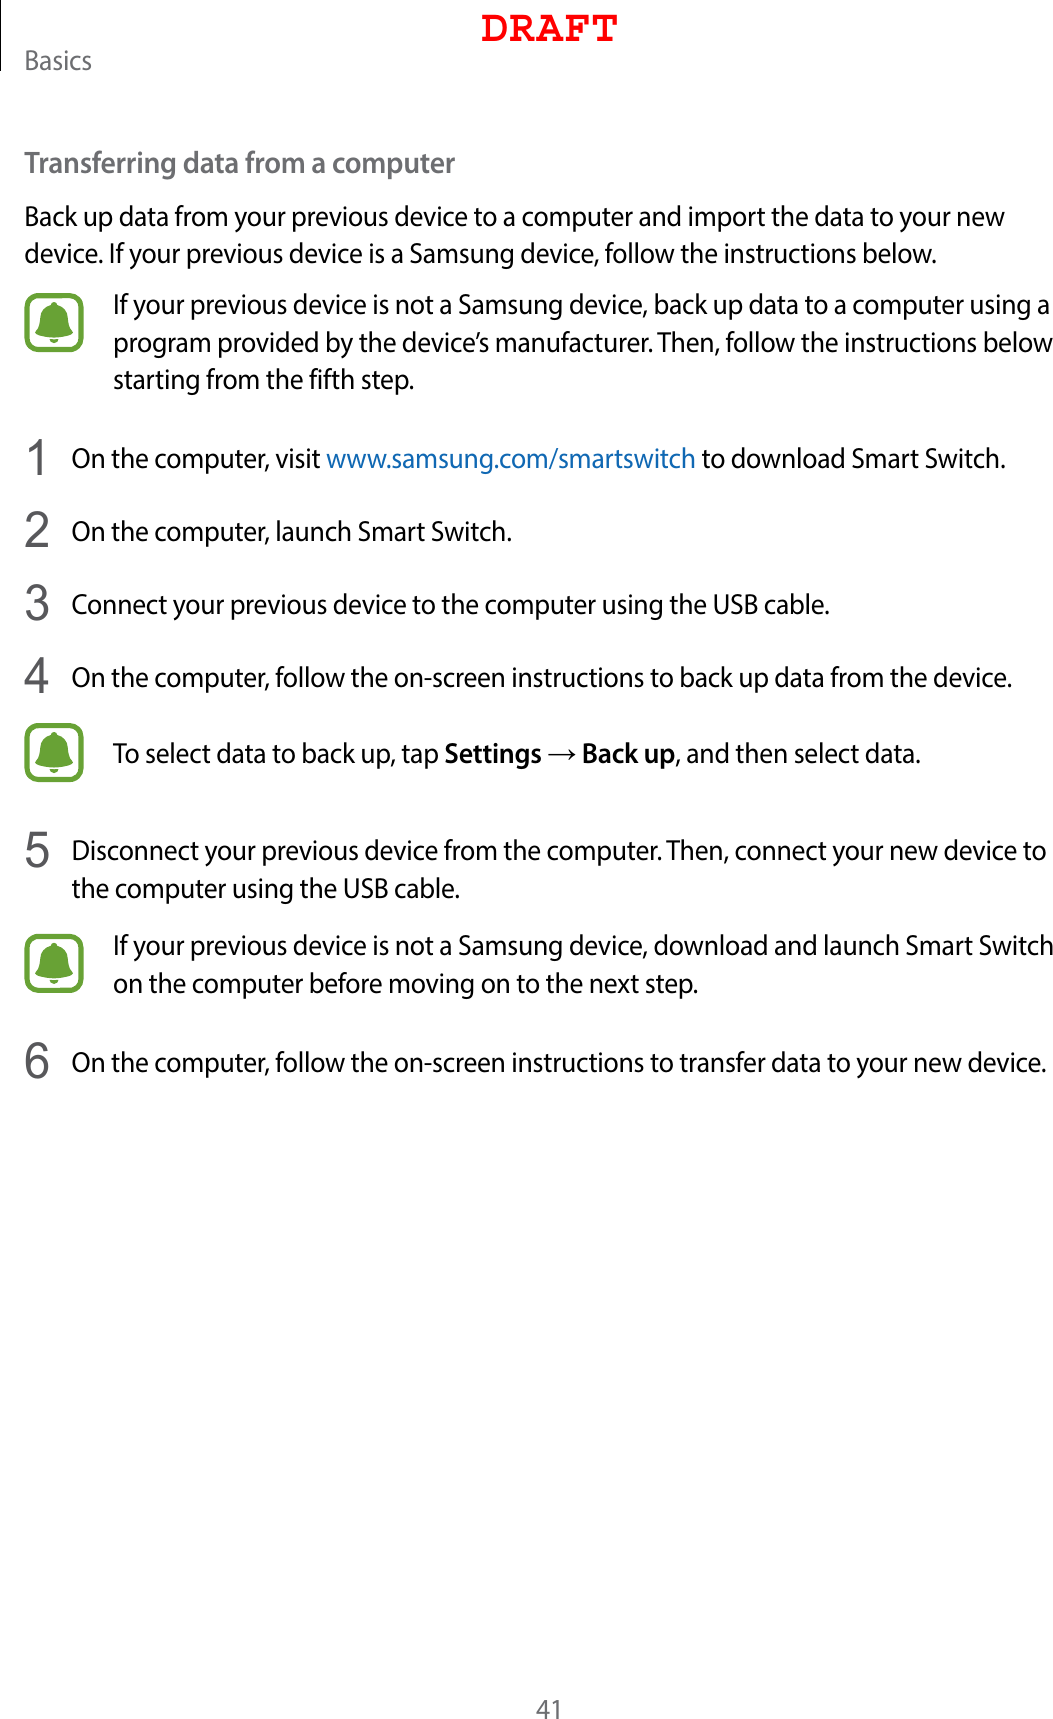 Basics41Transferring data from a computerBack up data from your previous device to a computer and import the data to your new device. If your previous device is a Samsung device, follow the instructions below.If your previous device is not a Samsung device, back up data to a computer using a program provided by the device’s manufacturer. Then, follow the instructions below starting from the fifth step.1  On the computer, visit www.samsung.com/smartswitch to download Smart Switch.2  On the computer, launch Smart Switch.3  Connect your previous device to the computer using the USB cable.4  On the computer, follow the on-screen instructions to back up data from the device.To select data to back up, tap Settings → Back up, and then select data.5  Disconnect your previous device from the computer. Then, connect your new device to the computer using the USB cable.If your previous device is not a Samsung device, download and launch Smart Switch on the computer before moving on to the next step.6  On the computer, follow the on-screen instructions to transfer data to your new device.DRAFT